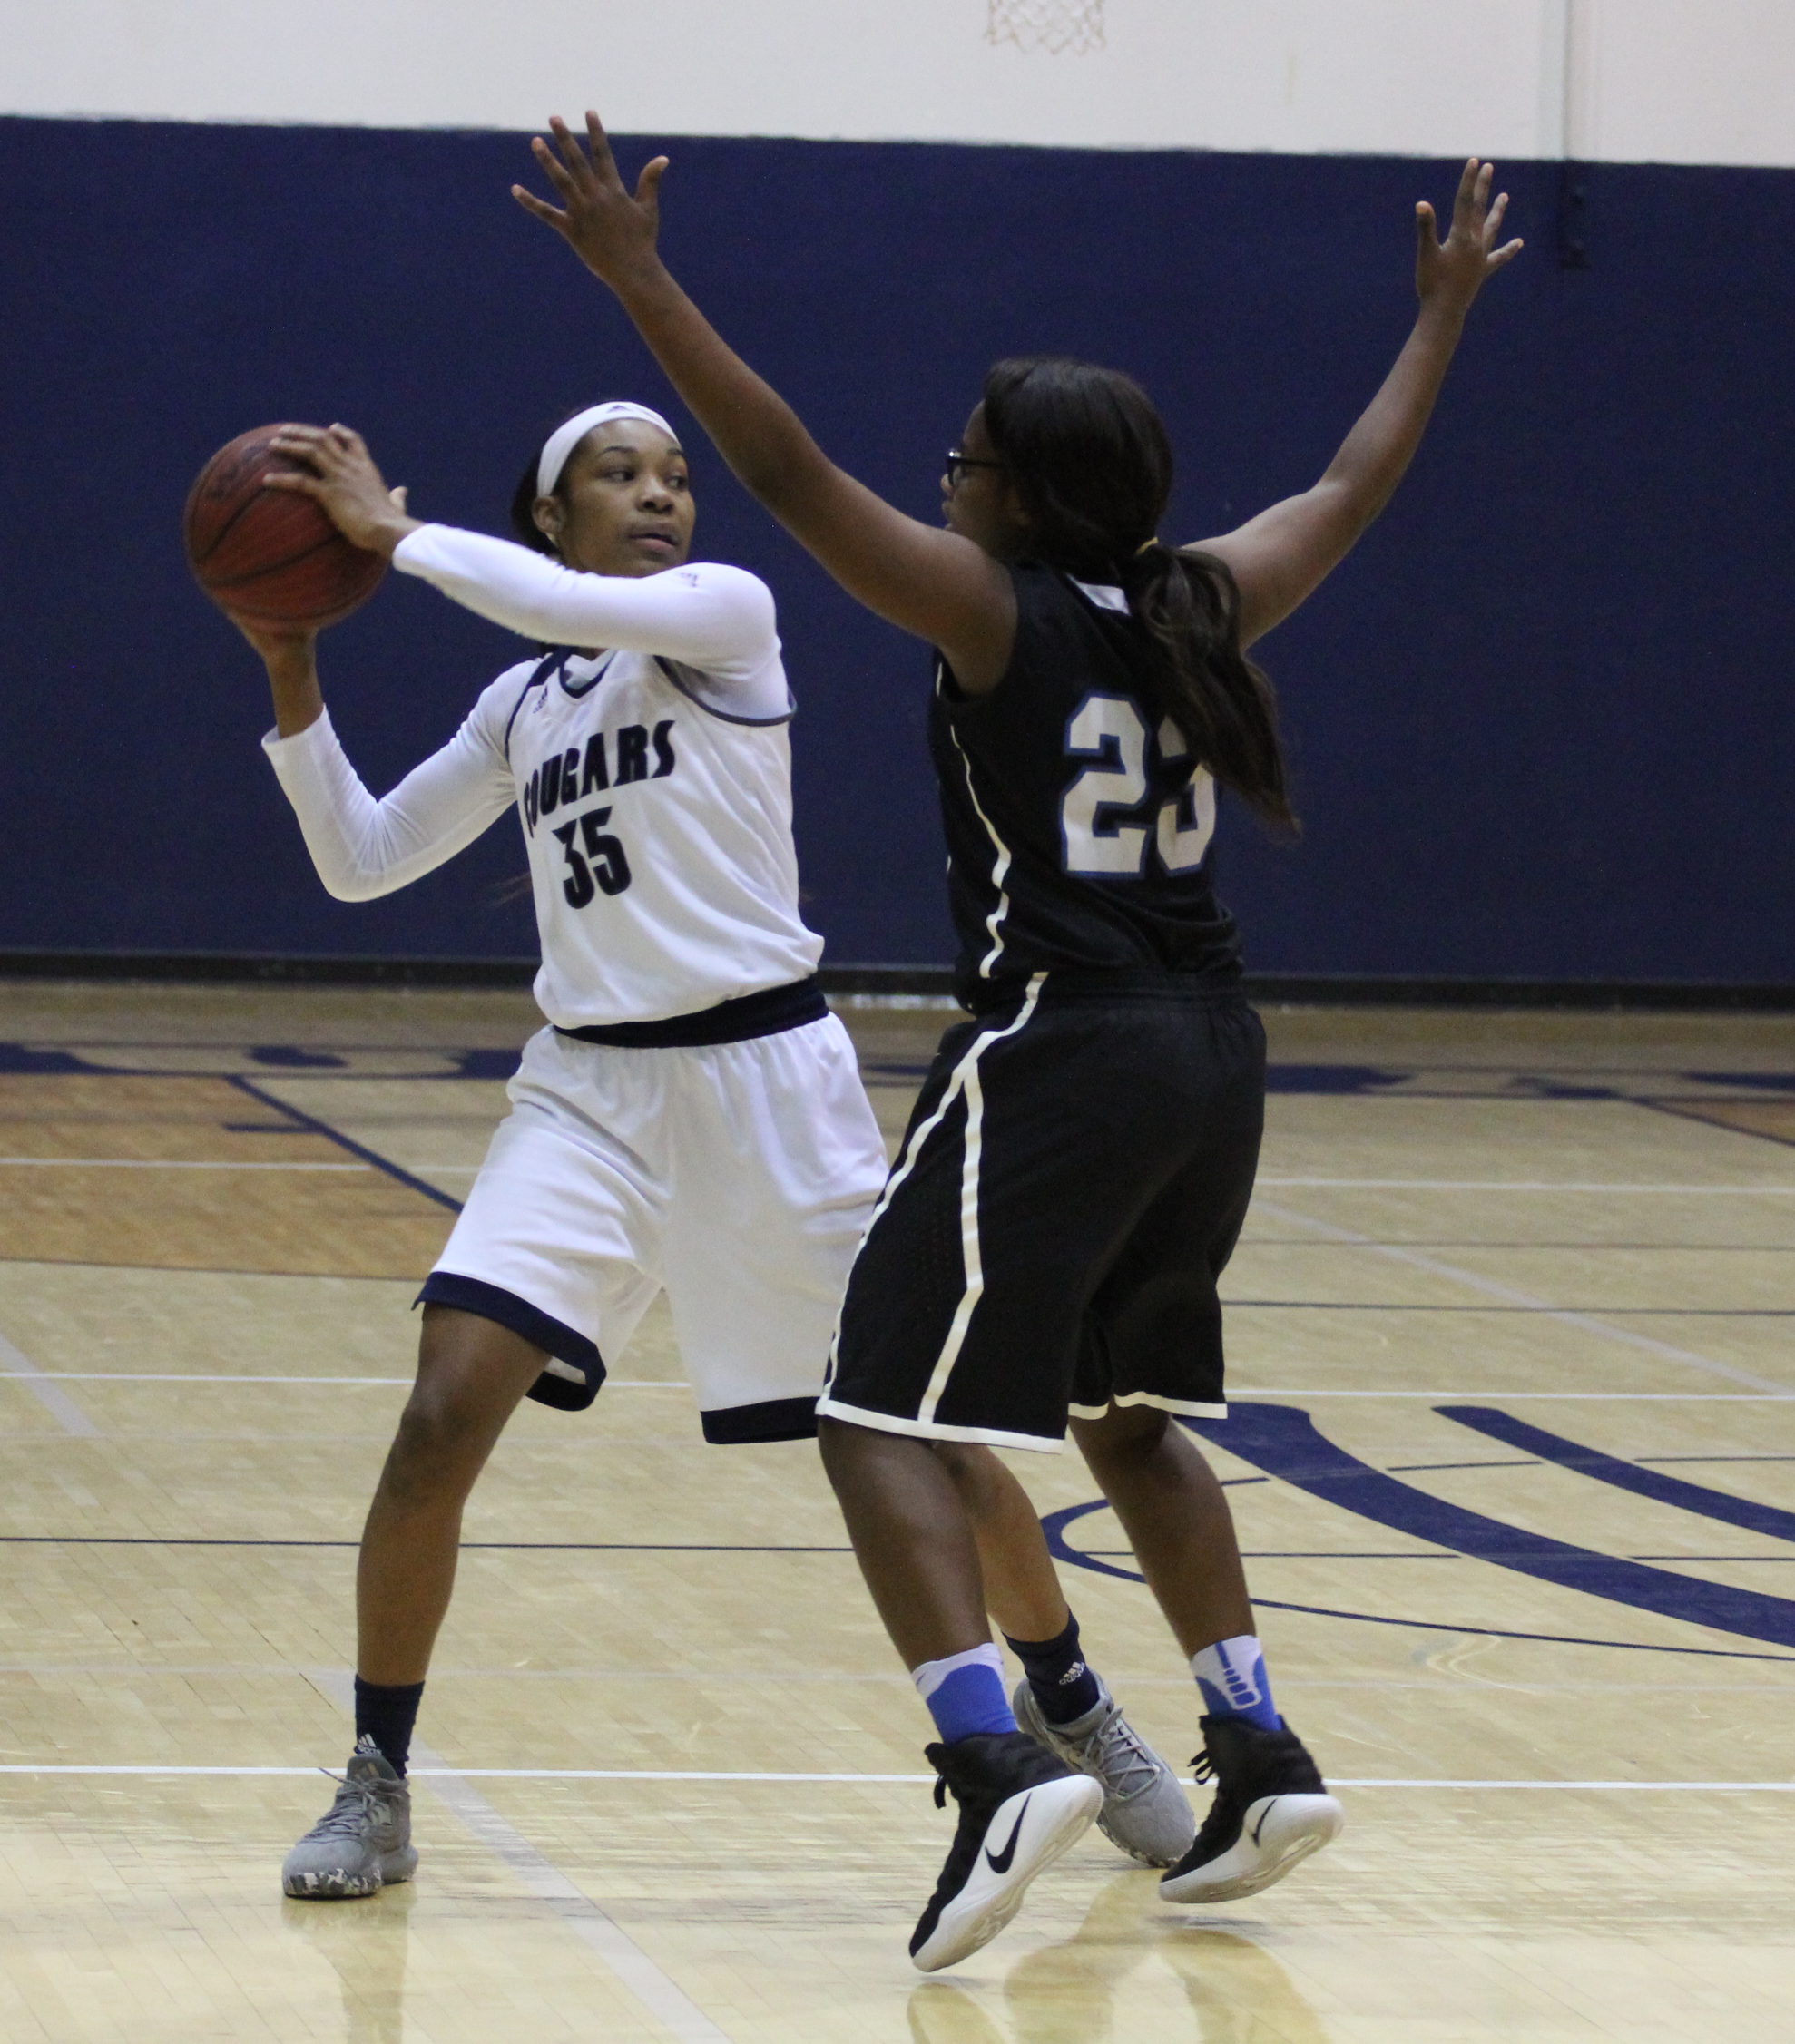 Lady Cougars’ season ends with tough loss to Ramsay in sub-regionals